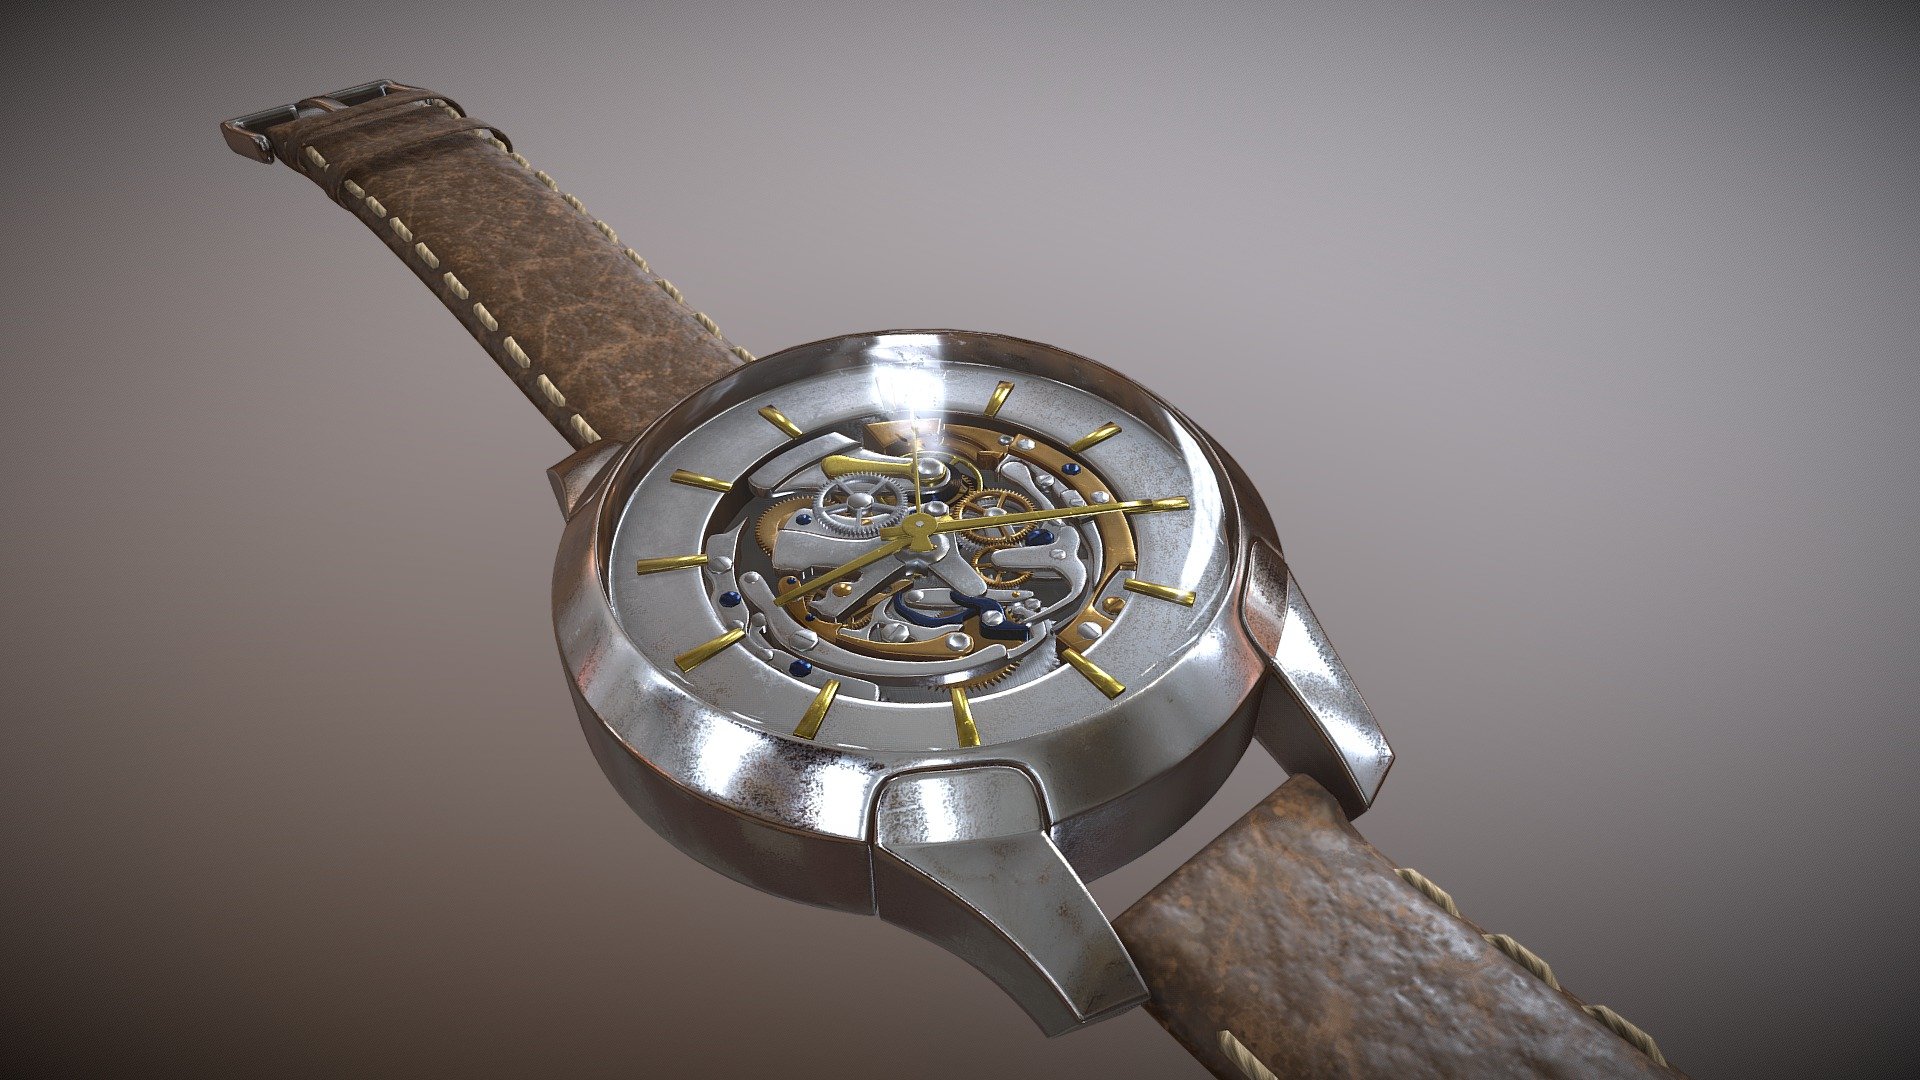 This automatic wristwatch is an artistic approach, the gears are not physically correct.

The following file formats are included: .blend, .3ds, .dae, .fbx, .glb, .obj

The textures used are CC0 licensed and from the following websites:

https://cc0textures.com/ 

https://www.cgbookcase.com/ 

(Some of them have been modified)


 - Automatic Wristwatch | Automatic Watch - Buy Royalty Free 3D model by blenderbirb 3d model